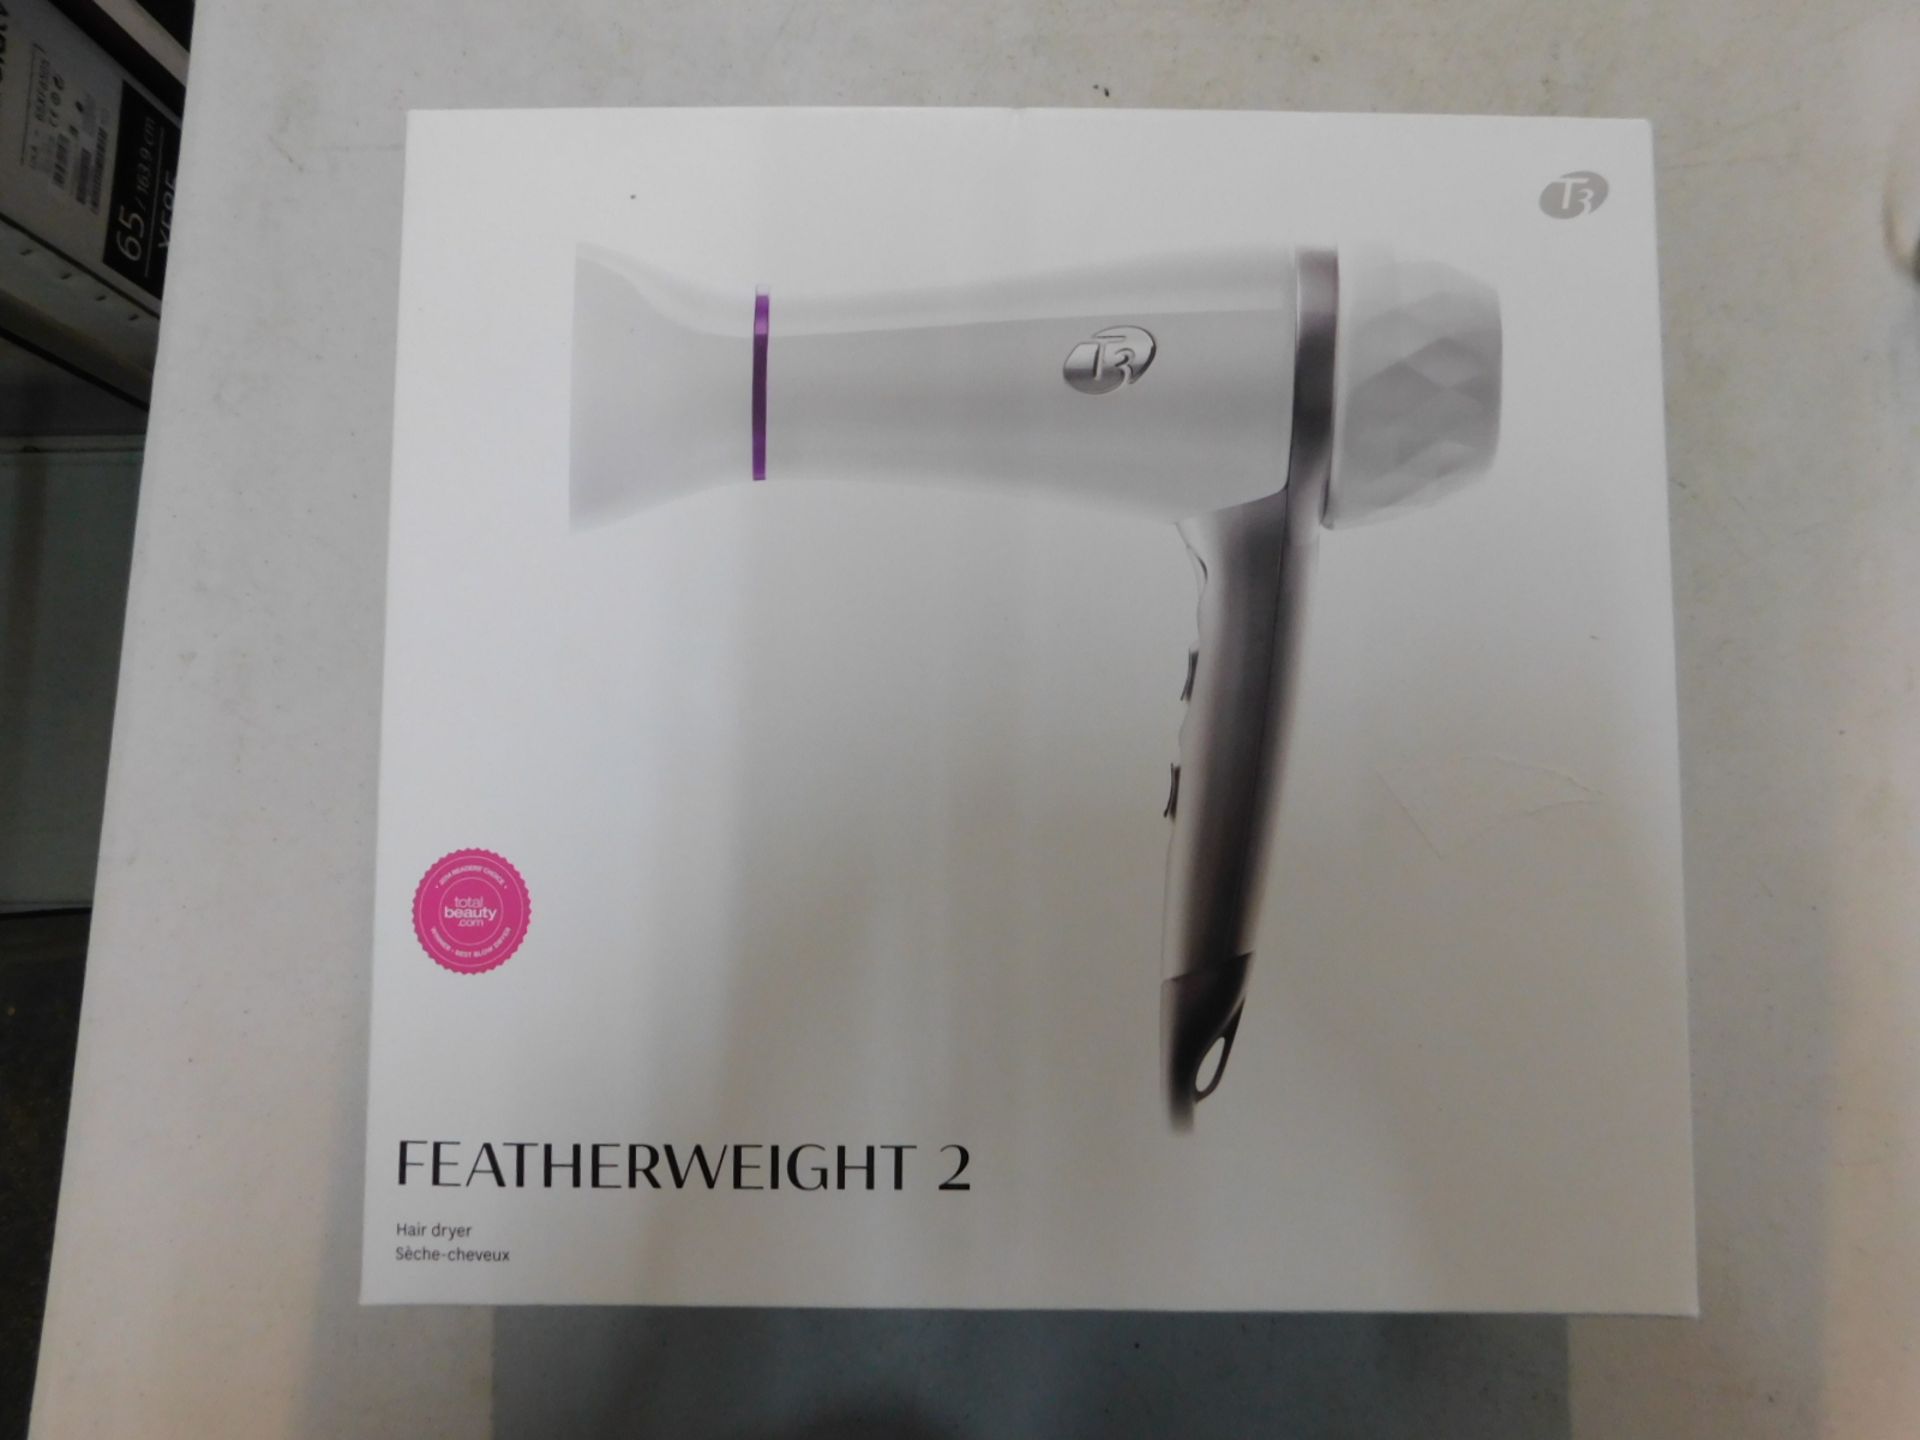 1 BOXED T3 FEATHERWEIGHT 2 1800W HAIR DRYER RRP Â£79.99